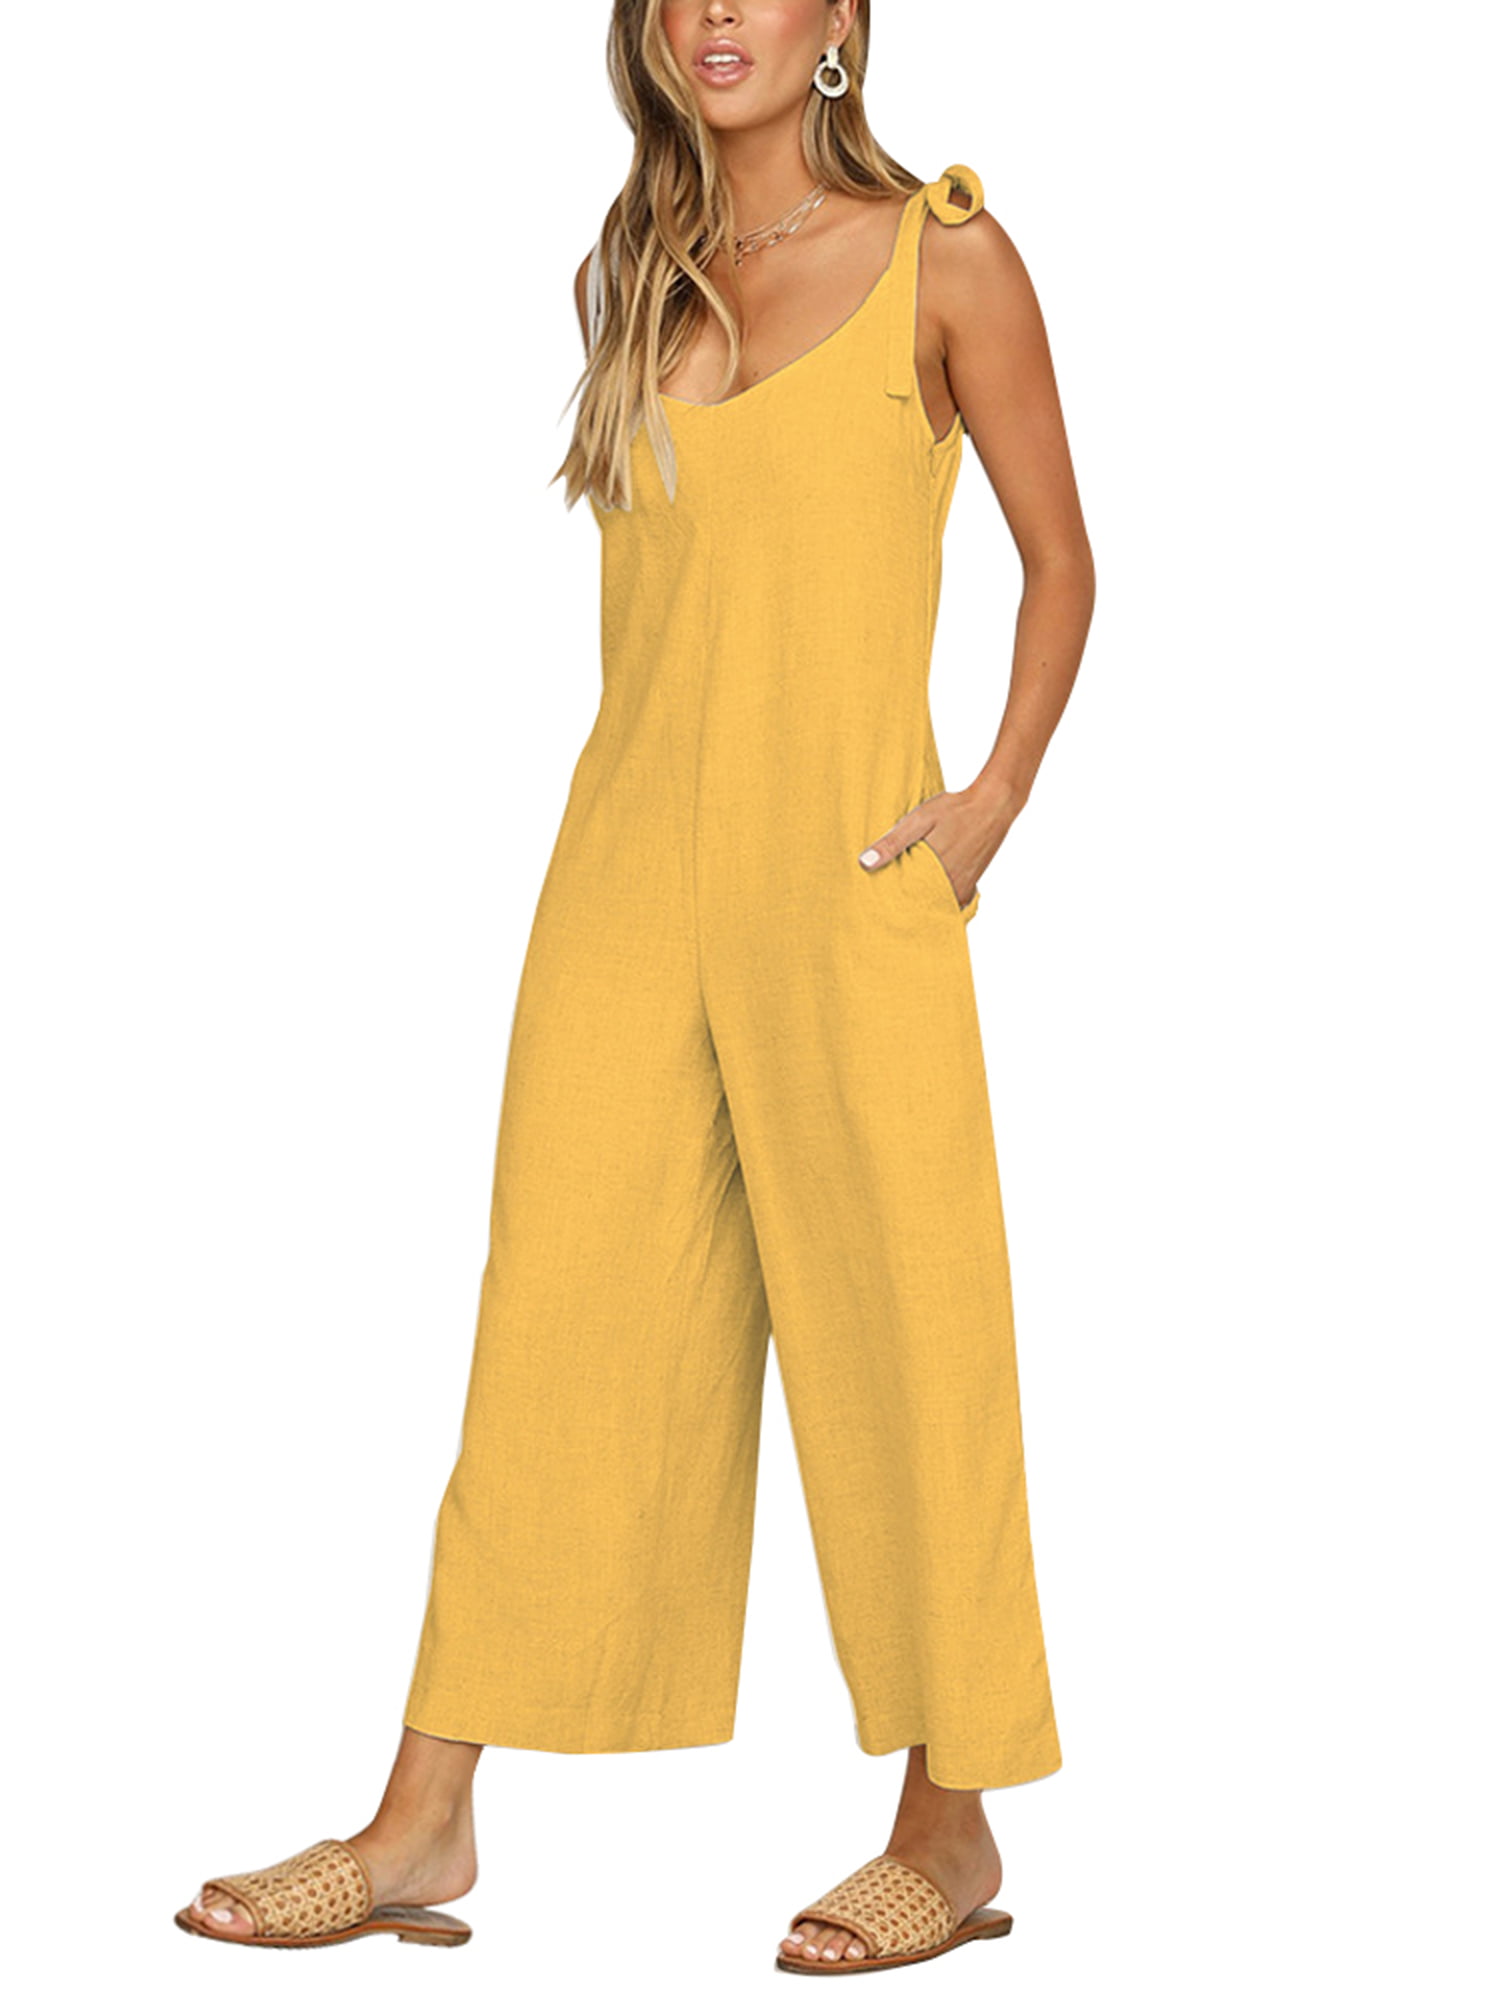 SUNNYME Womens Loose Fit Jumpsuits Summer Casual Sleeveless Spaghetti Strap Wide Leg Jumpsuits Rompers with Pockets